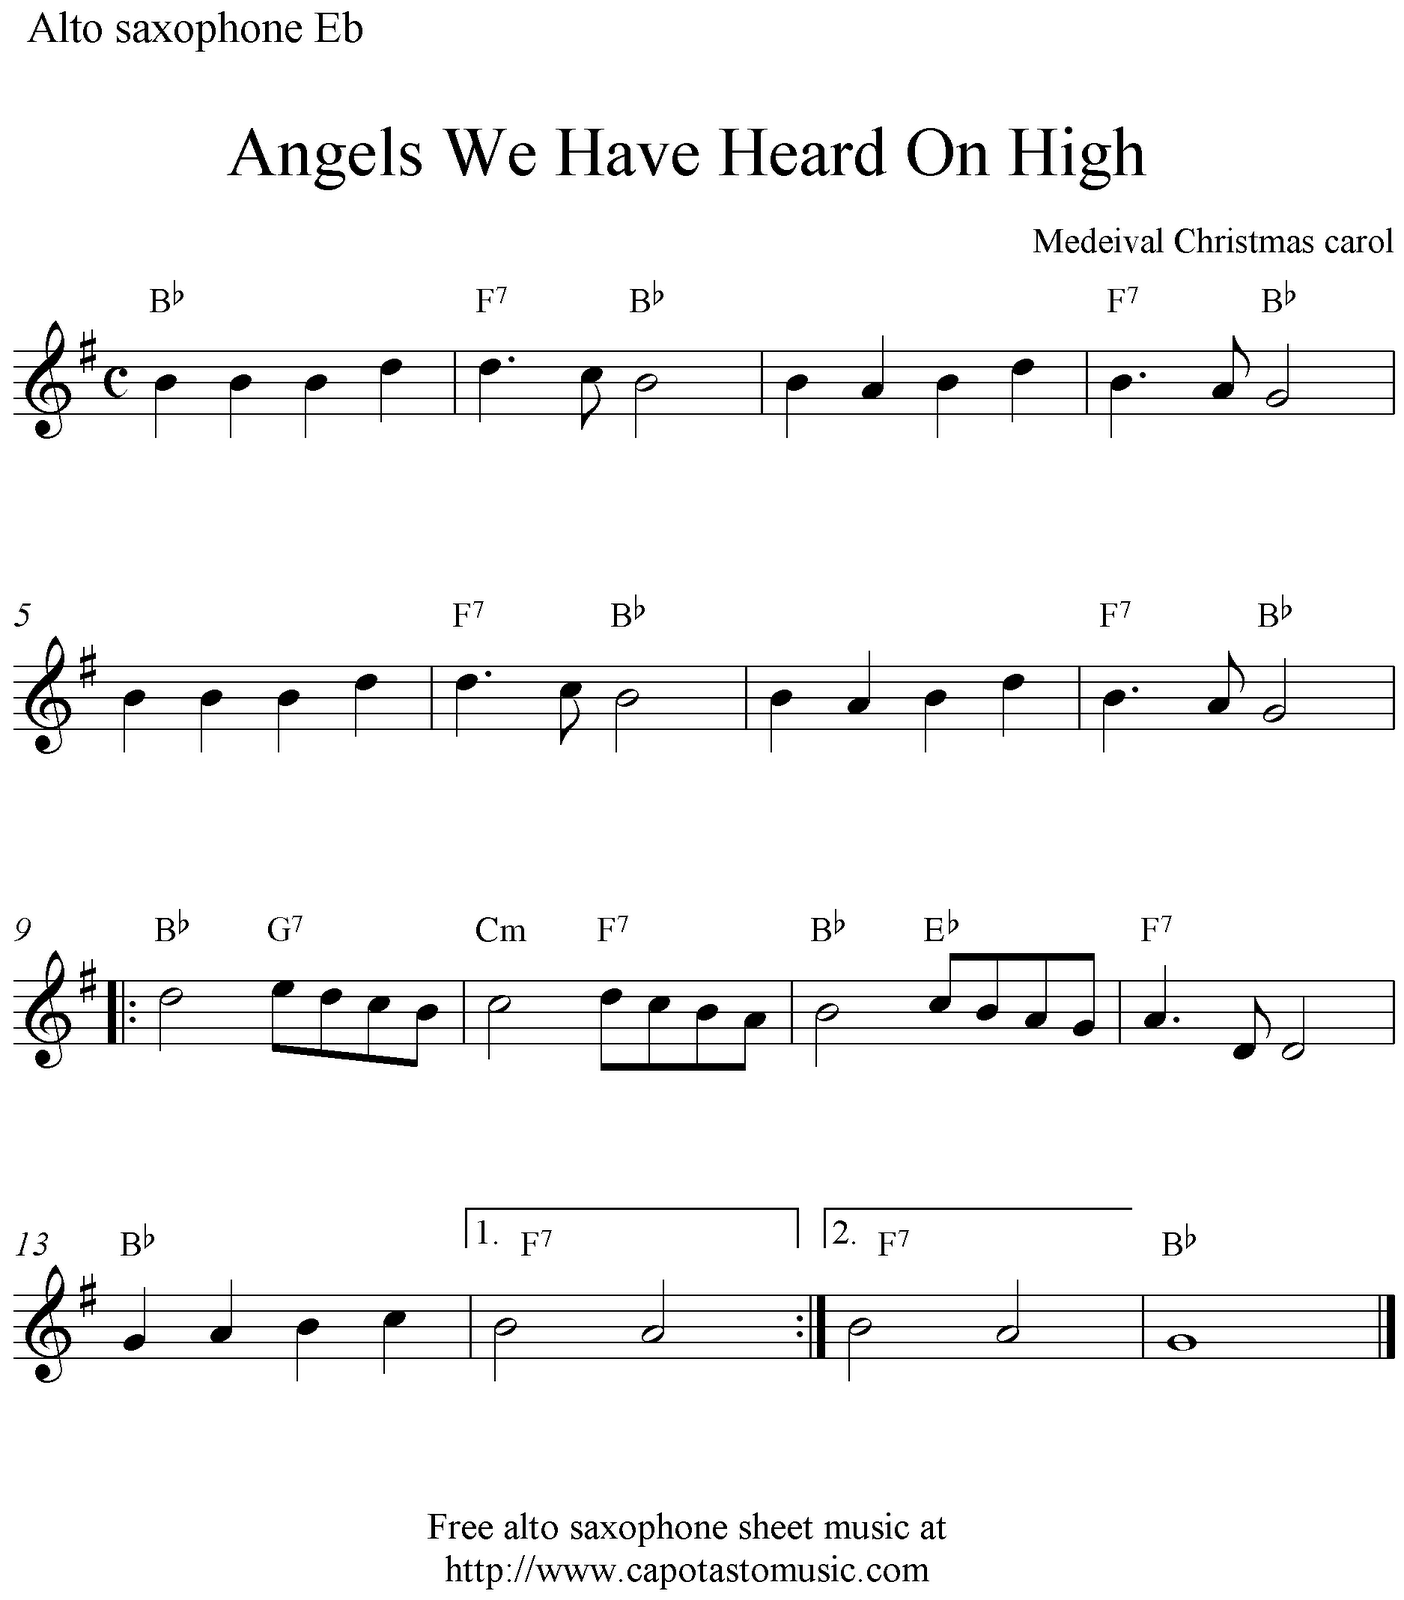 angels-we-have-heard-on-high-free-christmas-alto-saxophone-sheet-music